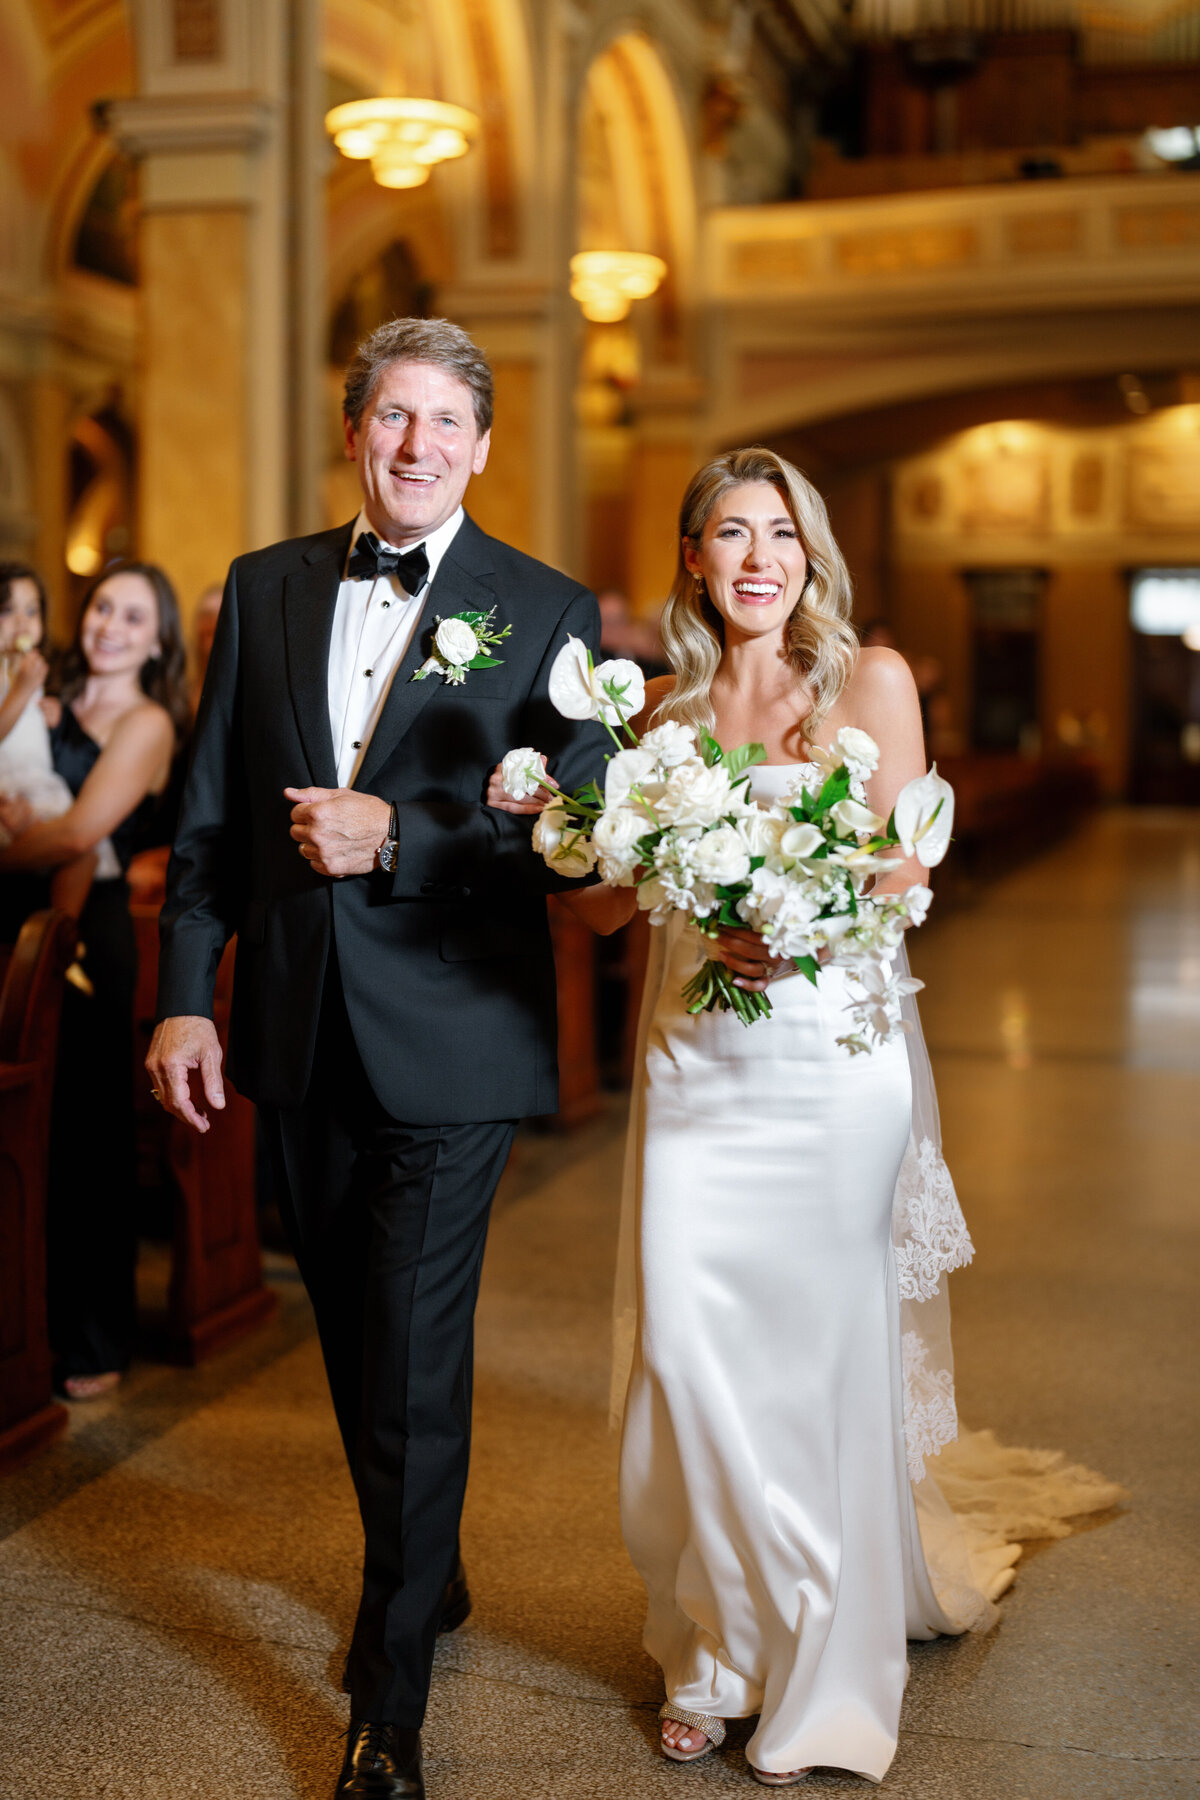 Aspen-Avenue-Chicago-Wedding-Photographer-Chicago-Athletic-Association-Simplicitee-XO-Design-Co-St-Mary-of-the-Angels-Church-Anomalie-Beauty-Timeless-Vogue-69